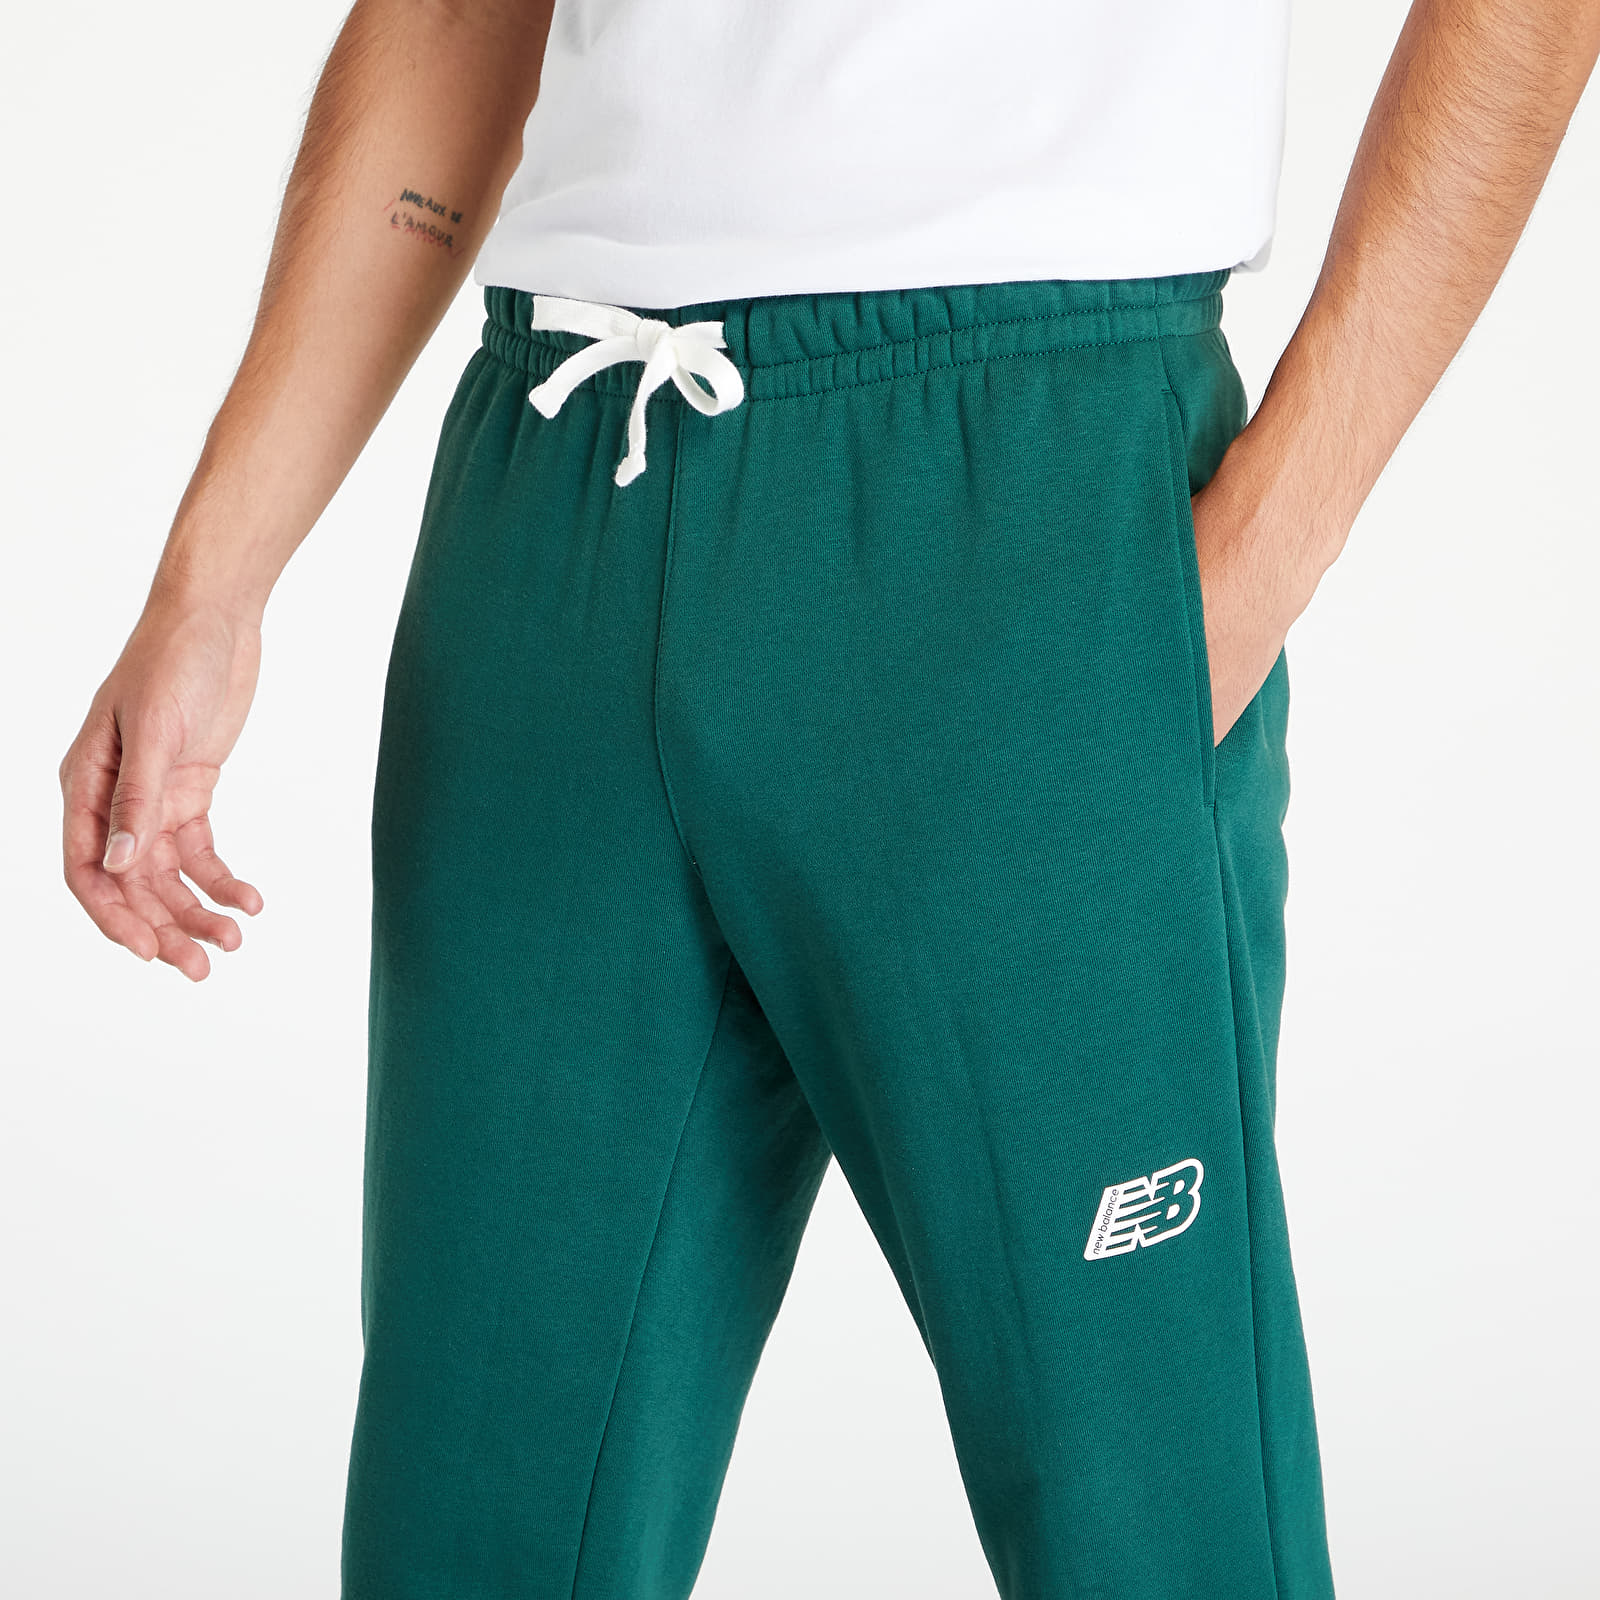 Fleece Footshop Green New Pants Jogger Magnify and | Essentials Nightwatch jeans Balance